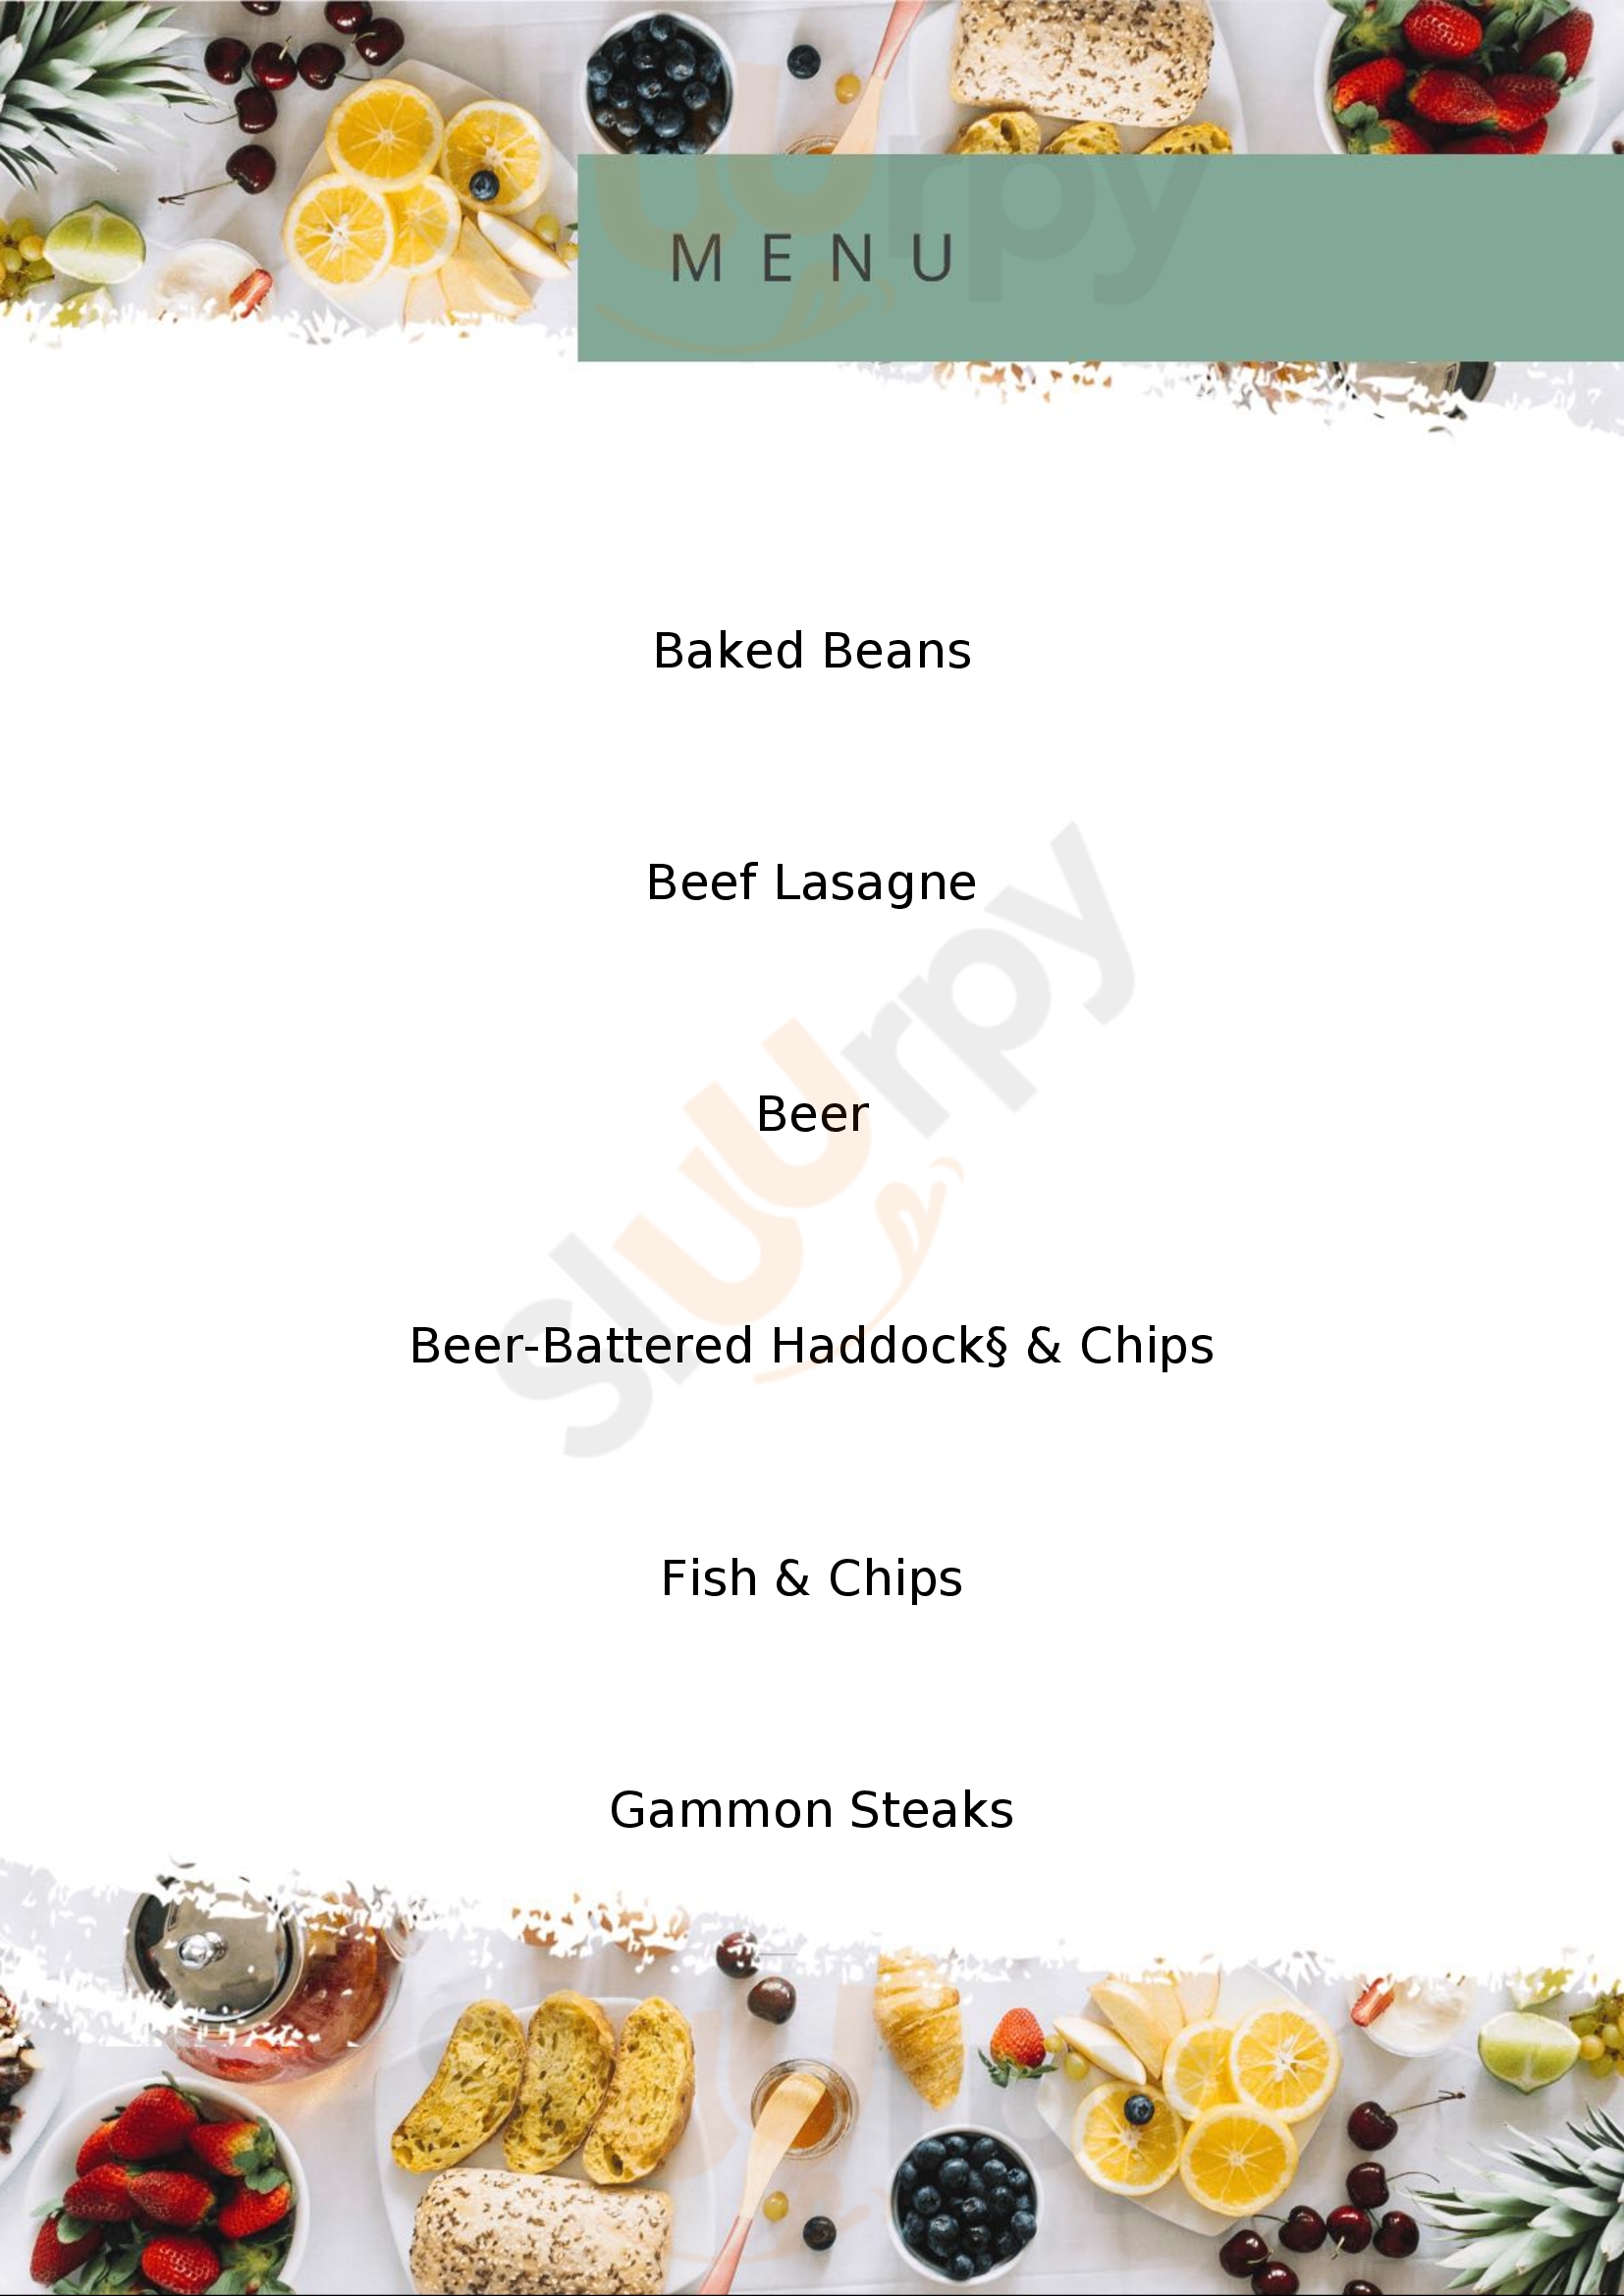 Cheswold Lodge Brewers Fayre Doncaster Menu - 1